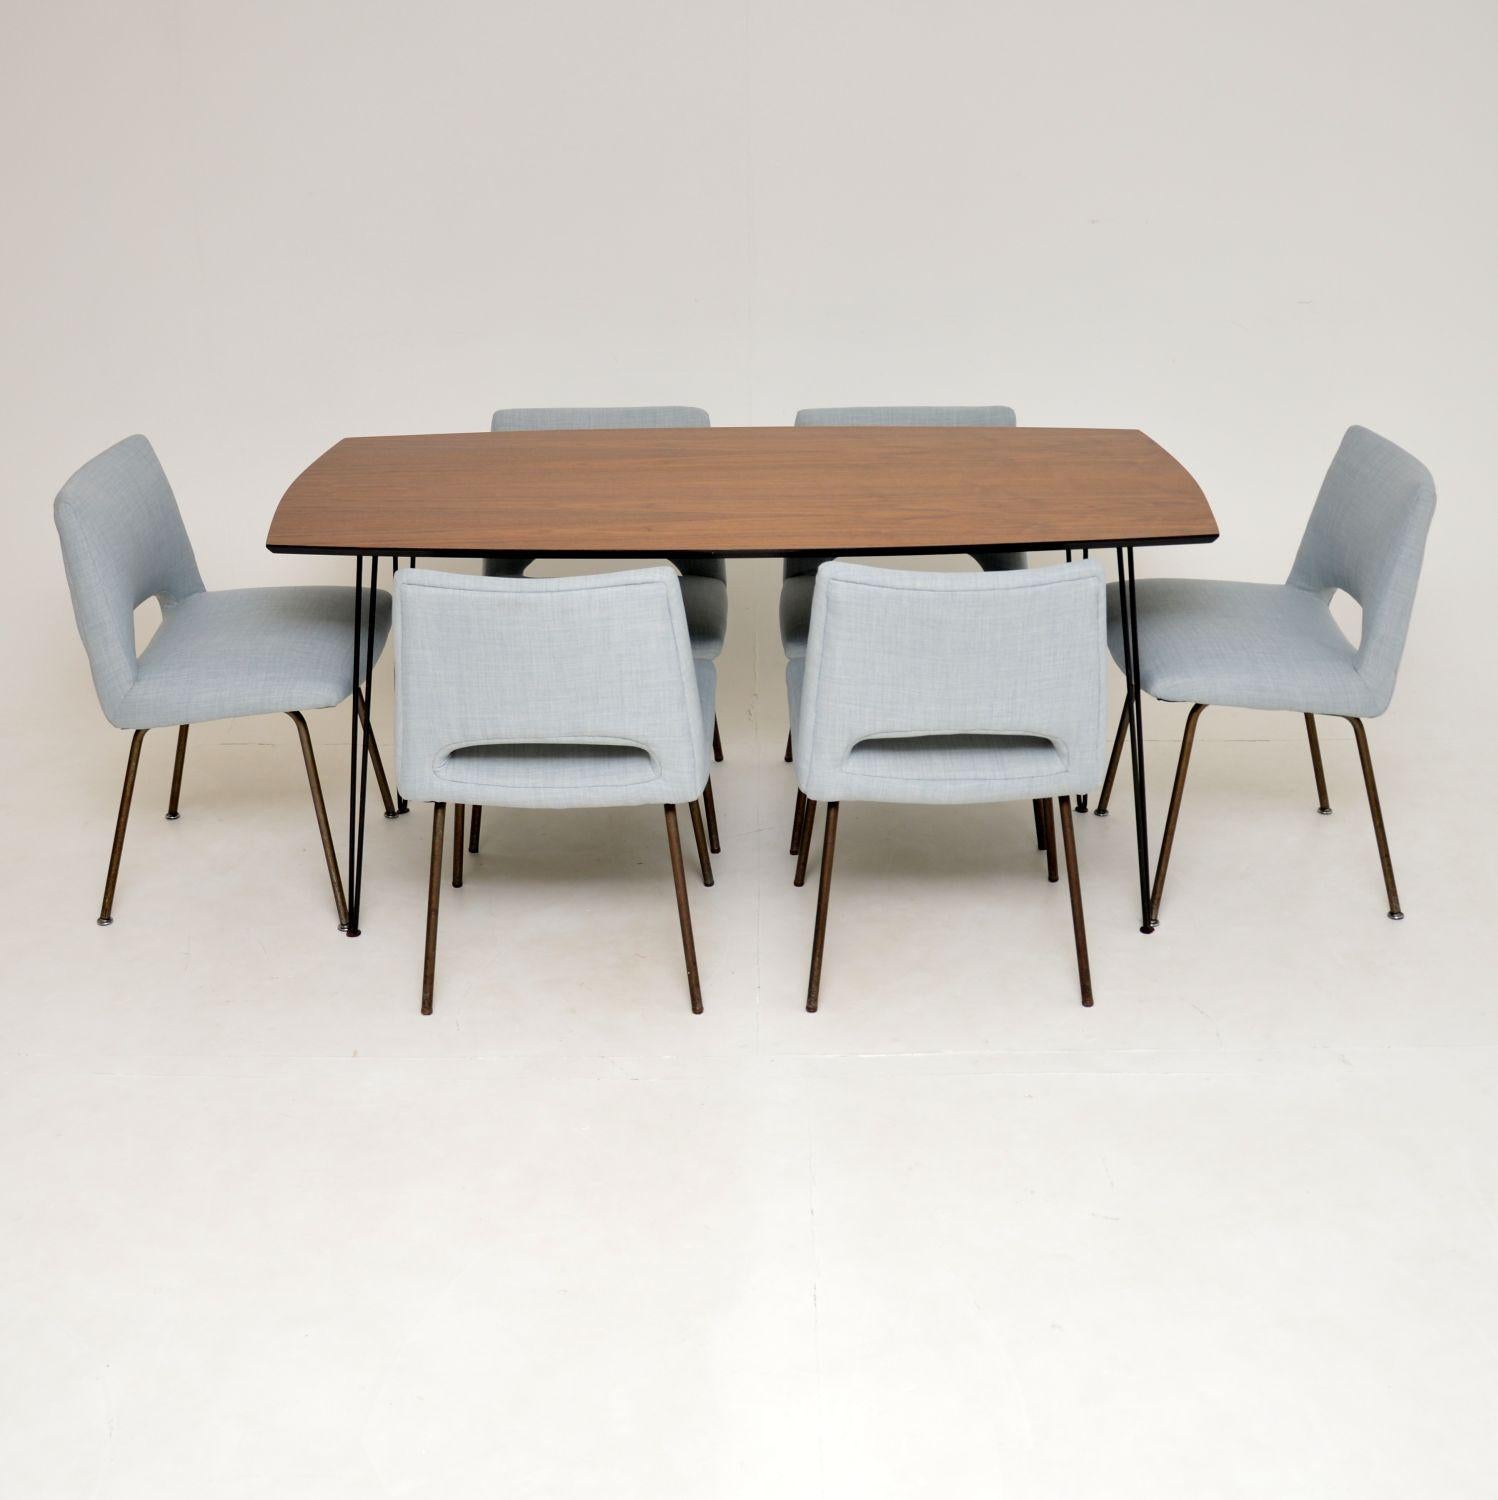 A gorgeous vintage dining suite, consisting of a walnut dining table with steel hairpin legs and six steel legged dining chairs. The table and chairs were both made in England, they both date from the 1950-1960’s.

We obtained these separately but